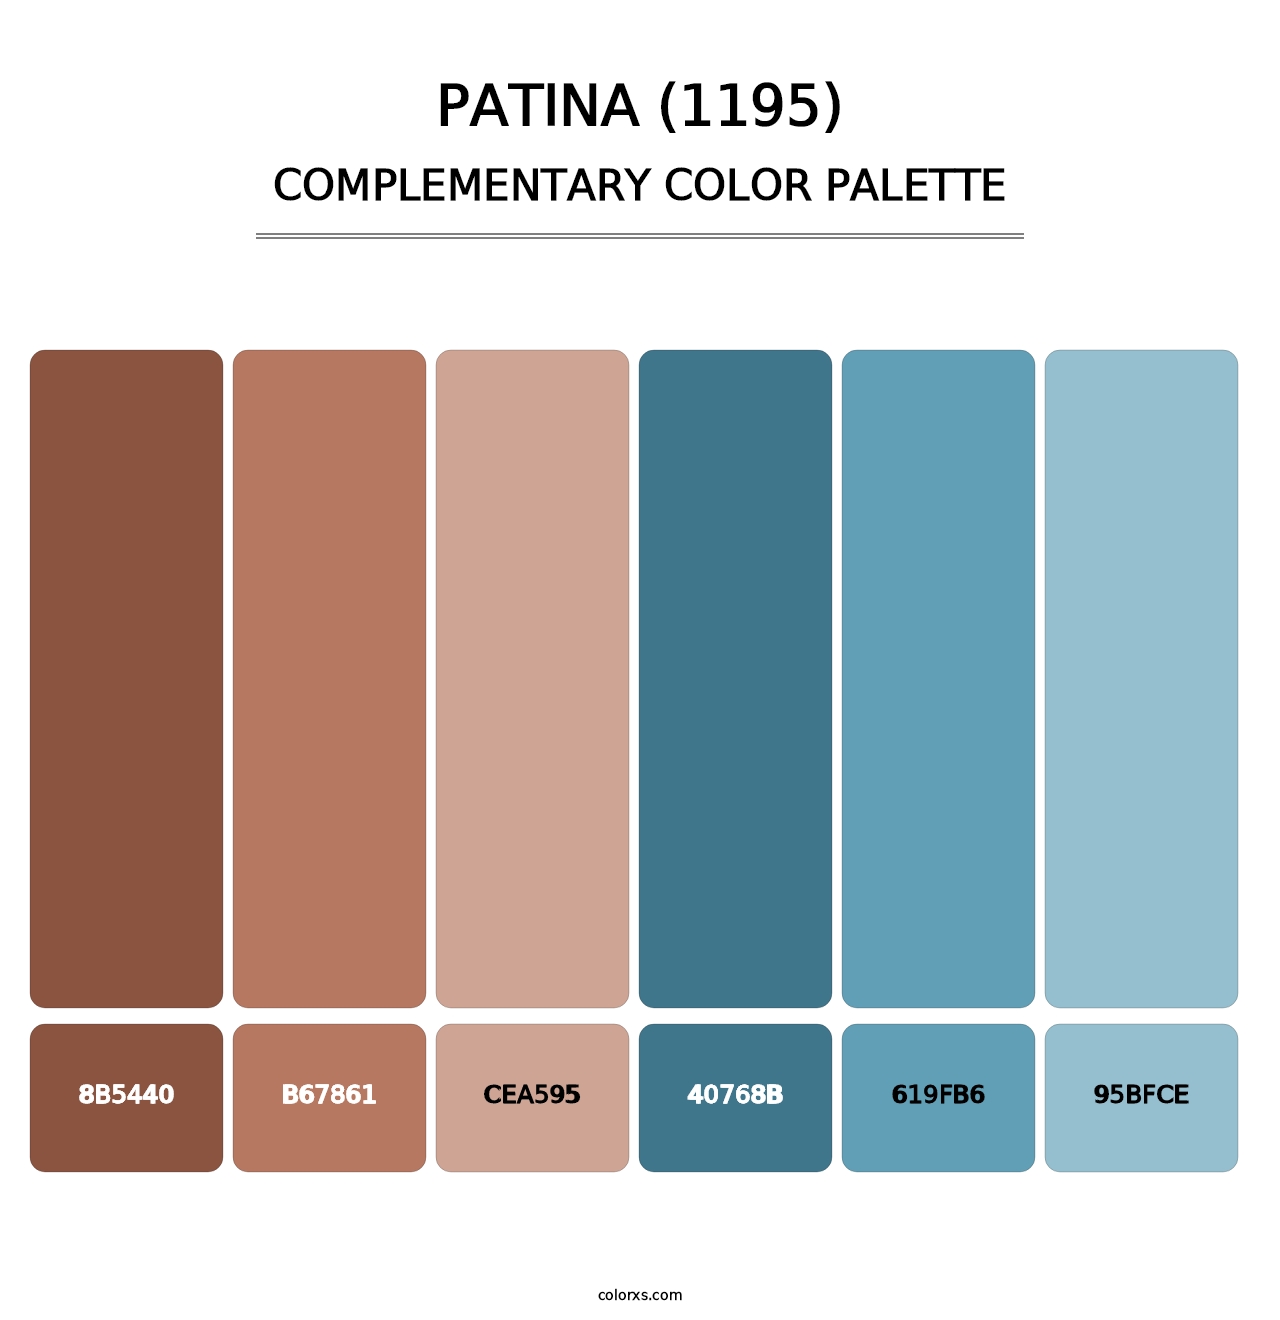 Patina (1195) - Complementary Color Palette